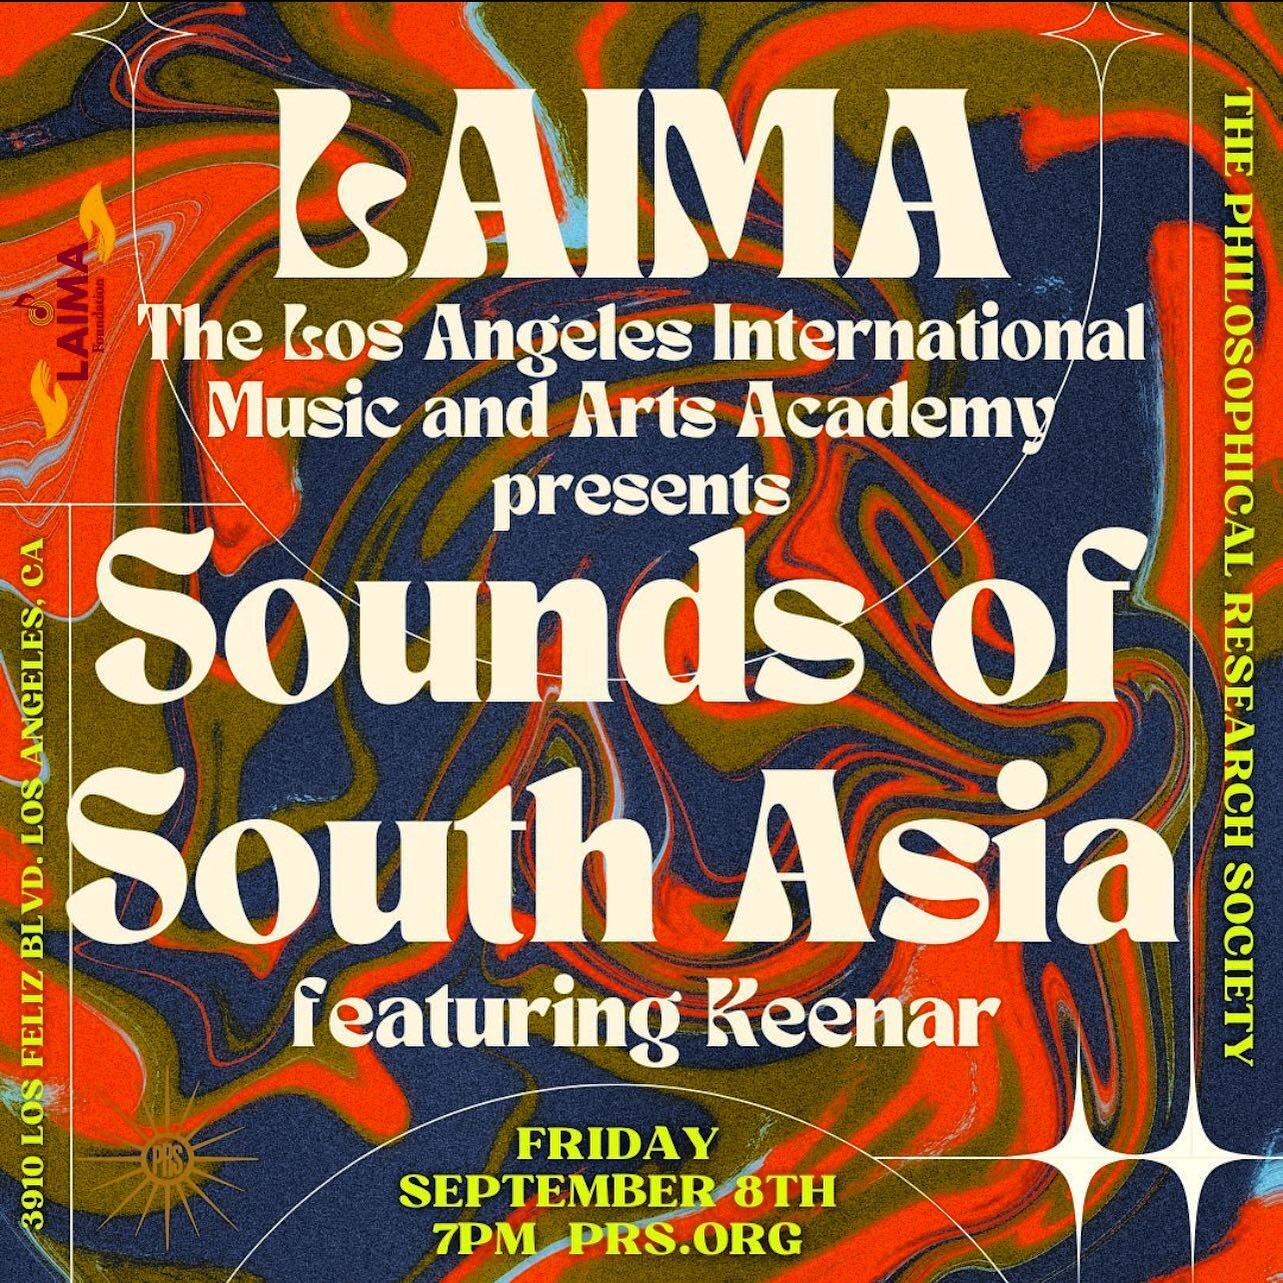 LAIMA presents Sounds of South Asia &ndash; feat. Keenar

The Philosophical Research Society is proud to partner with The Los Angeles International Music and Arts Academy (LAIMA) for a special courtyard concert of sublime South Asian music under the 